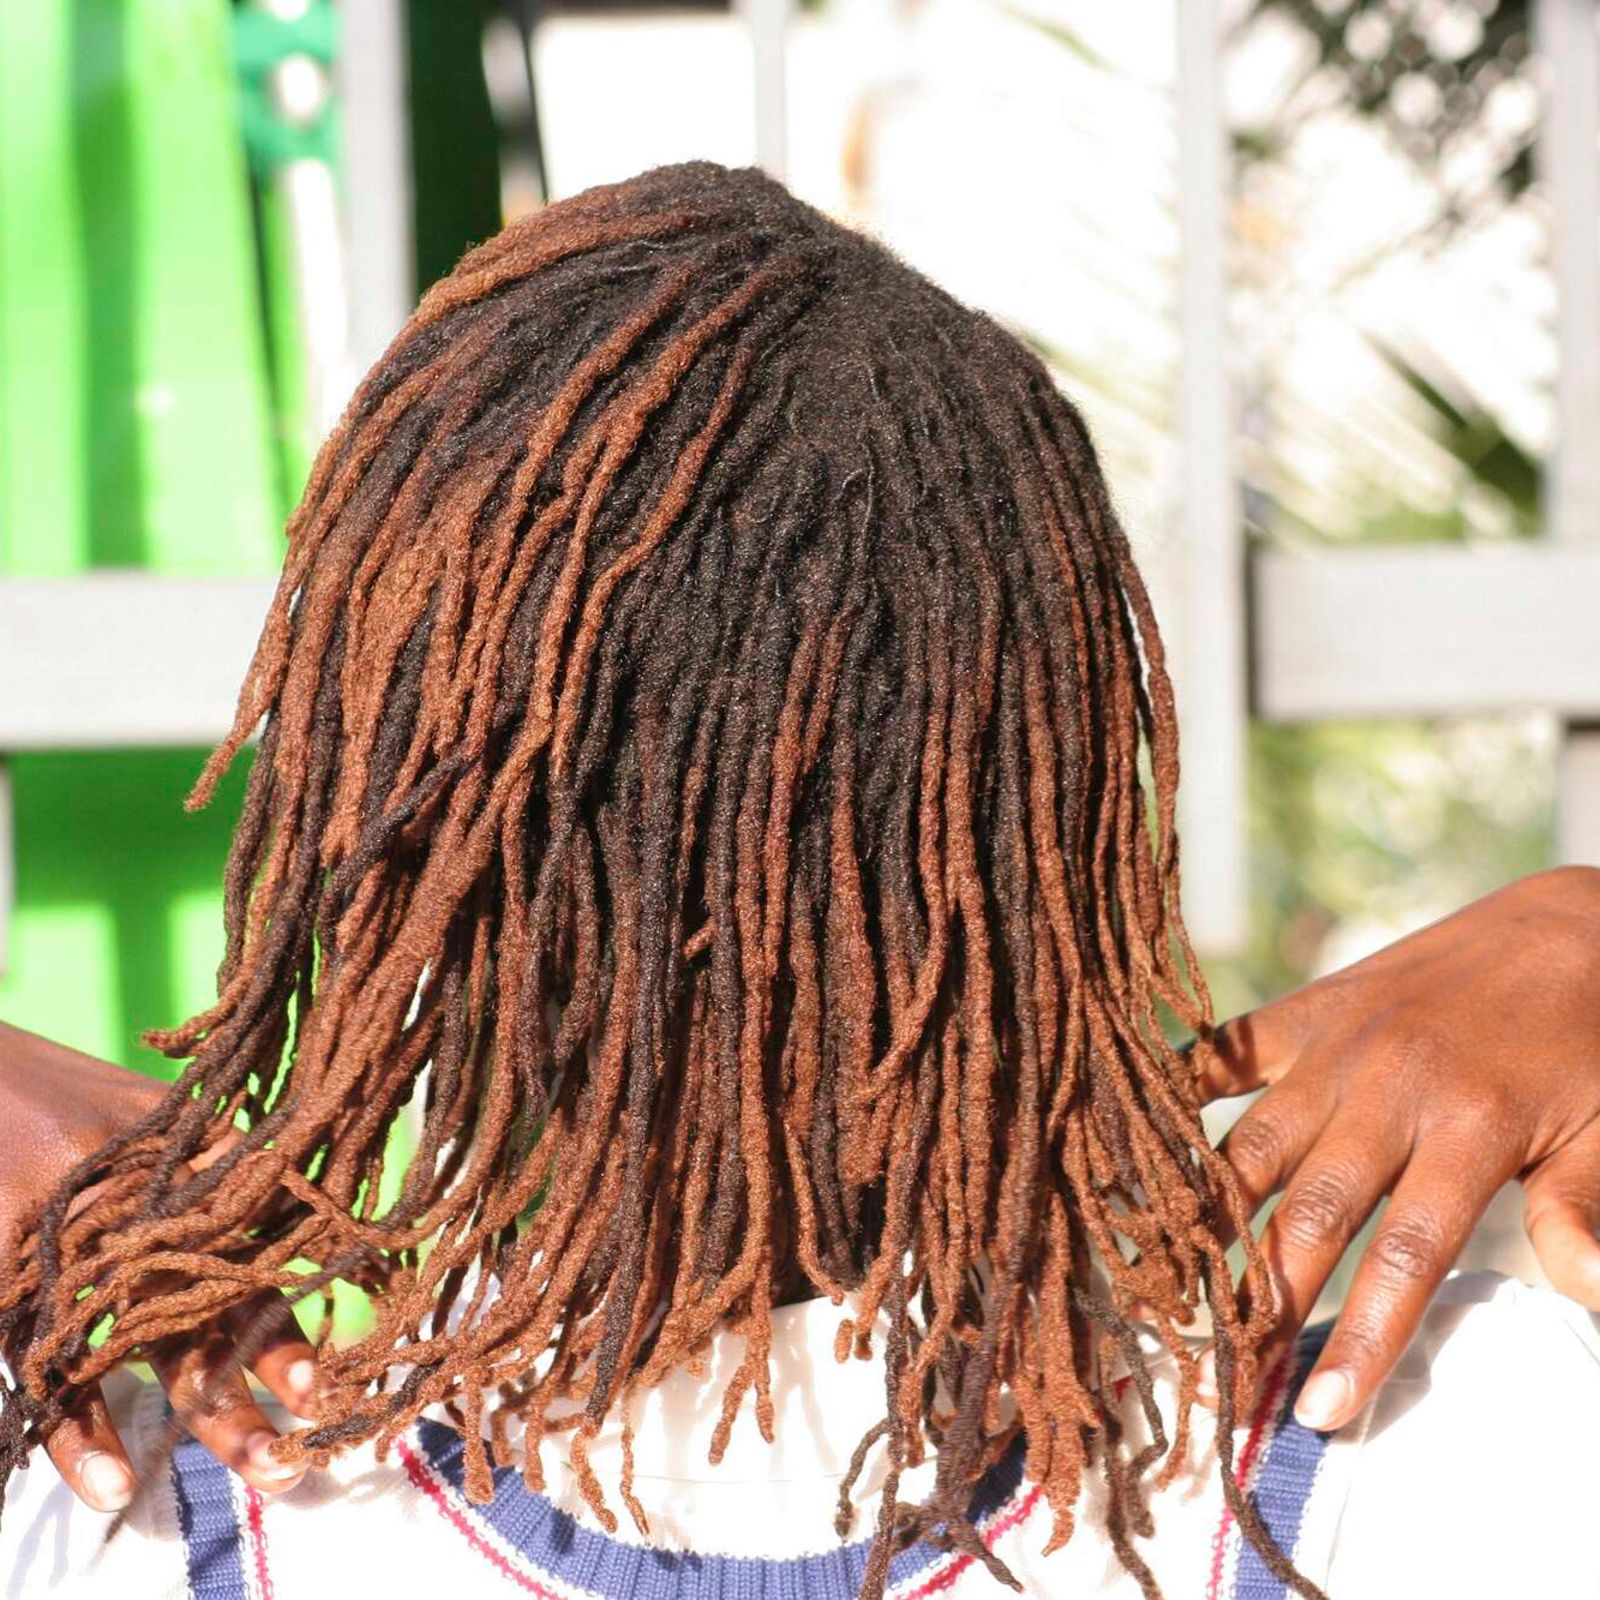 Get Inspired: 40 Dreadlocks Styles for Men That Will Take Your Look to the  Next Level | Mens dreadlock styles, Dreadlock hairstyles for men, Dreadlock  styles